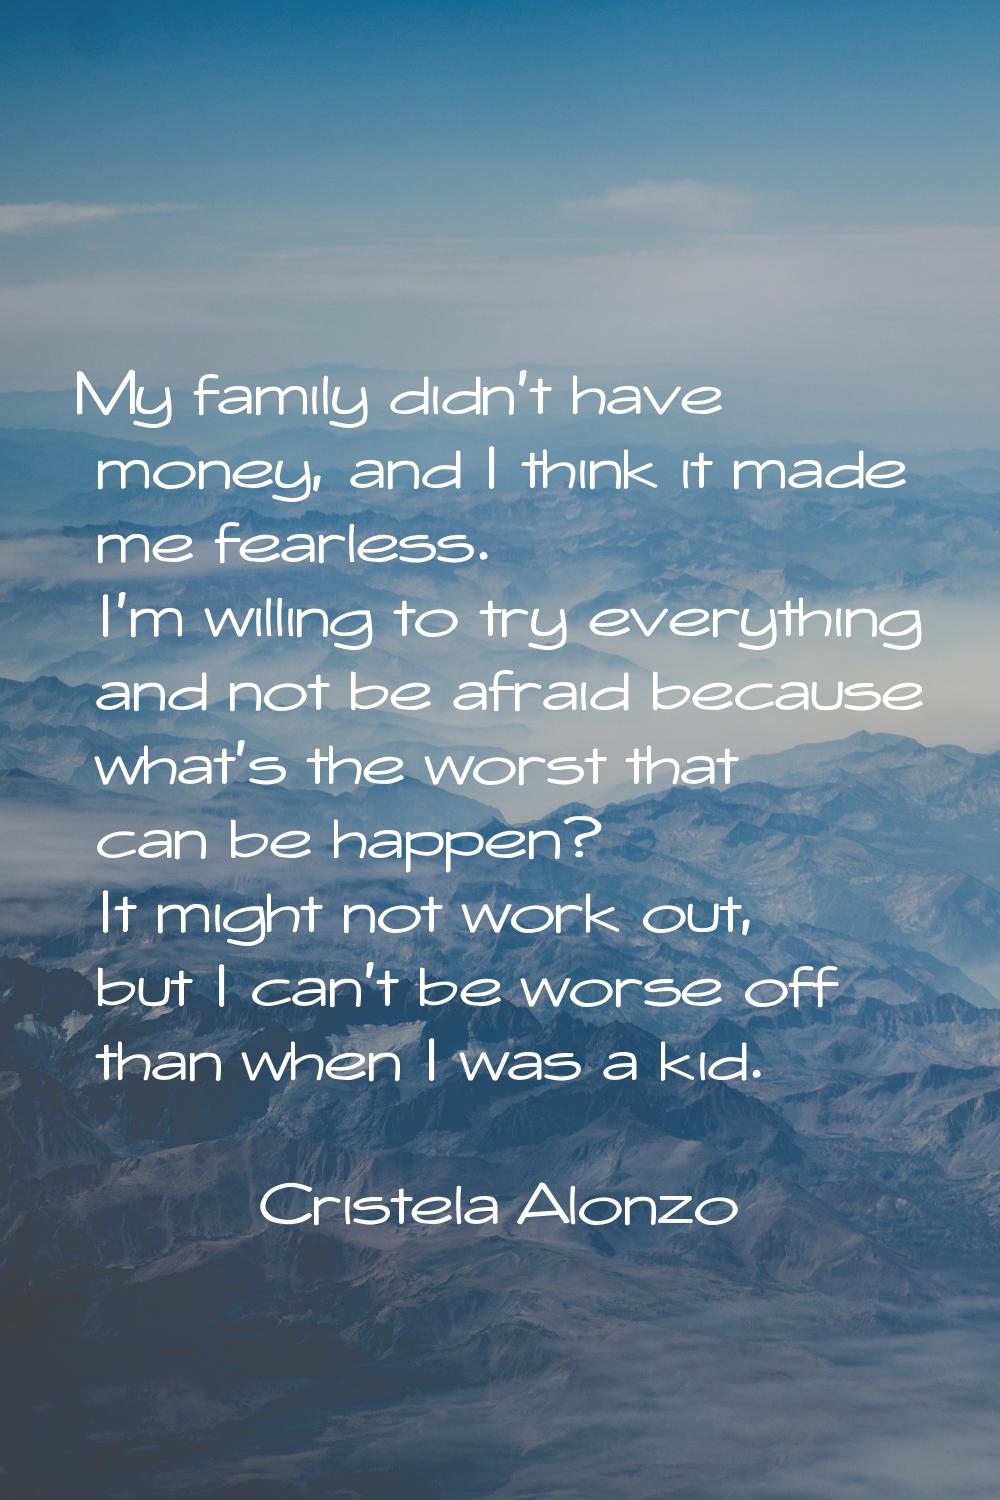 My family didn't have money, and I think it made me fearless. I'm willing to try everything and not